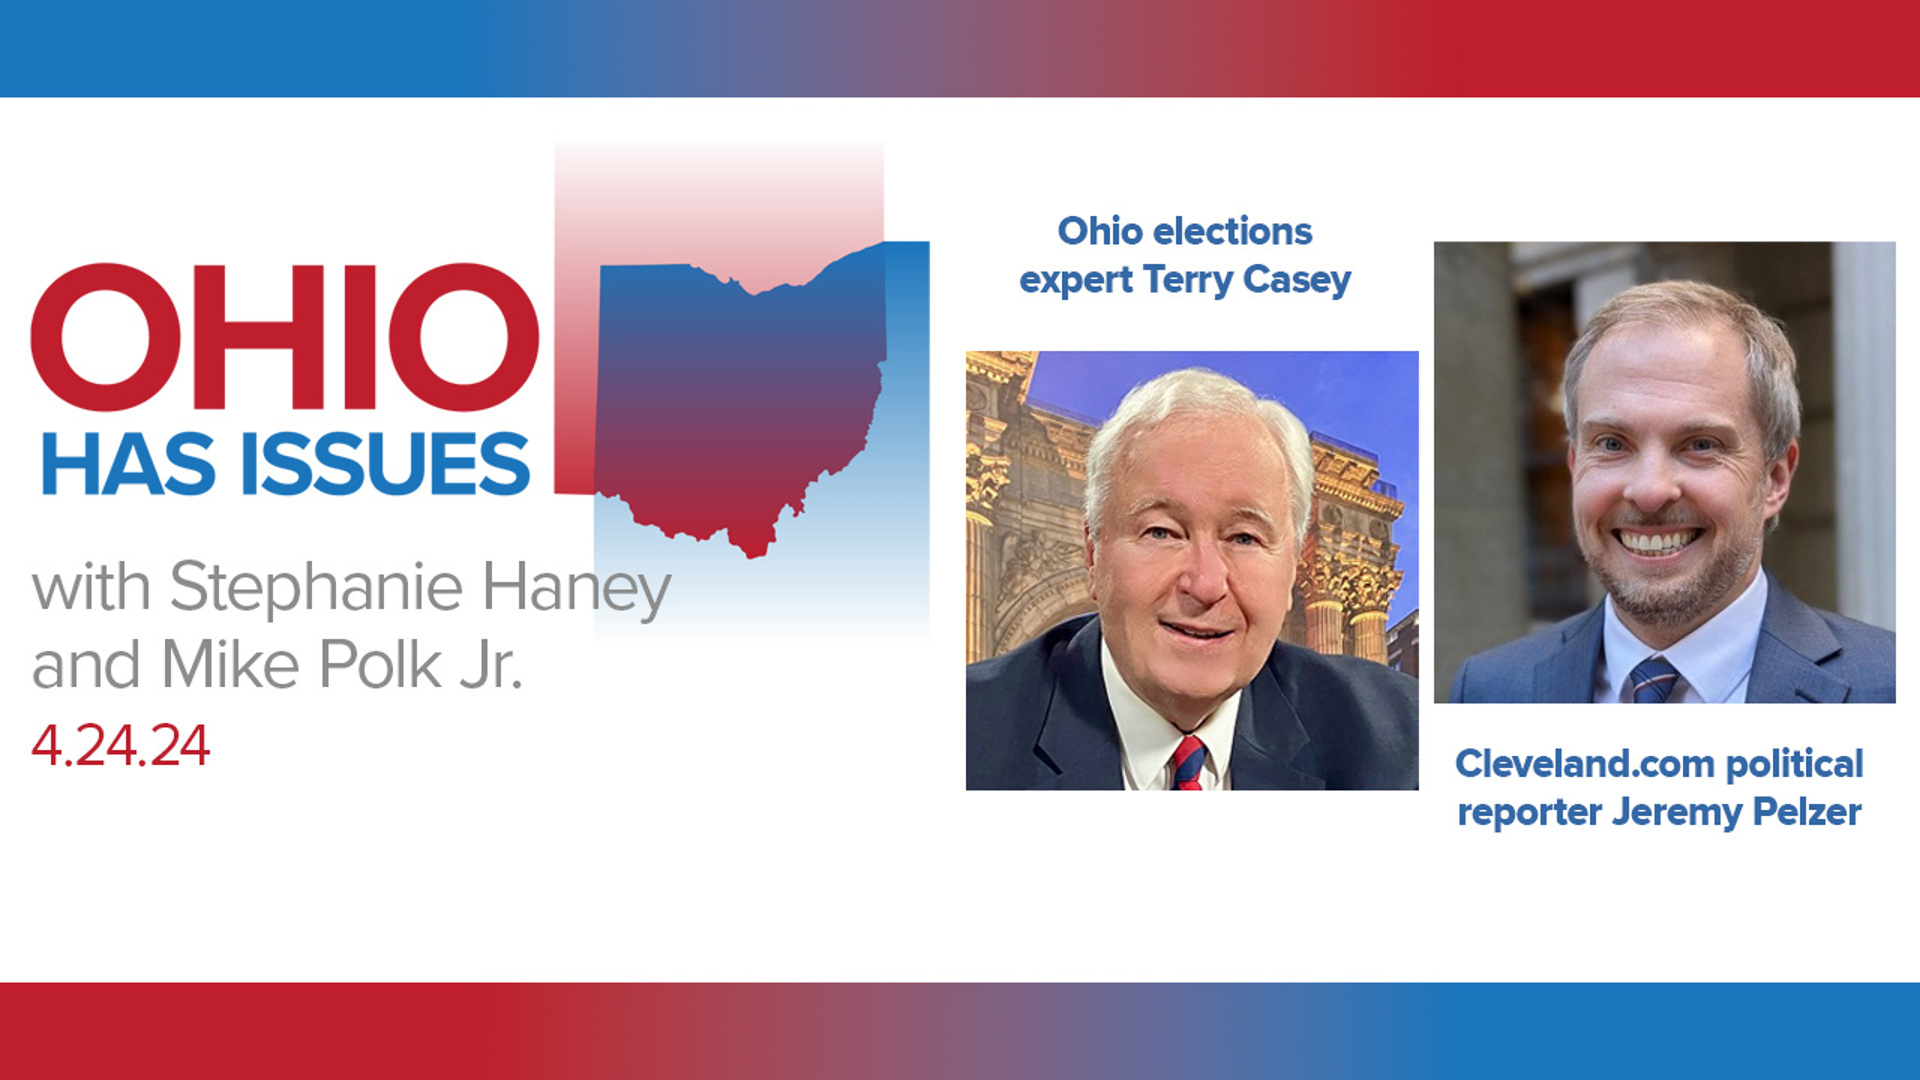 Will Biden be on Ohio's ballot in November? A 2009 law is at issue, and it's not clear how the problem is going to get fixed. Mike Polk and Stephanie Haney discuss.